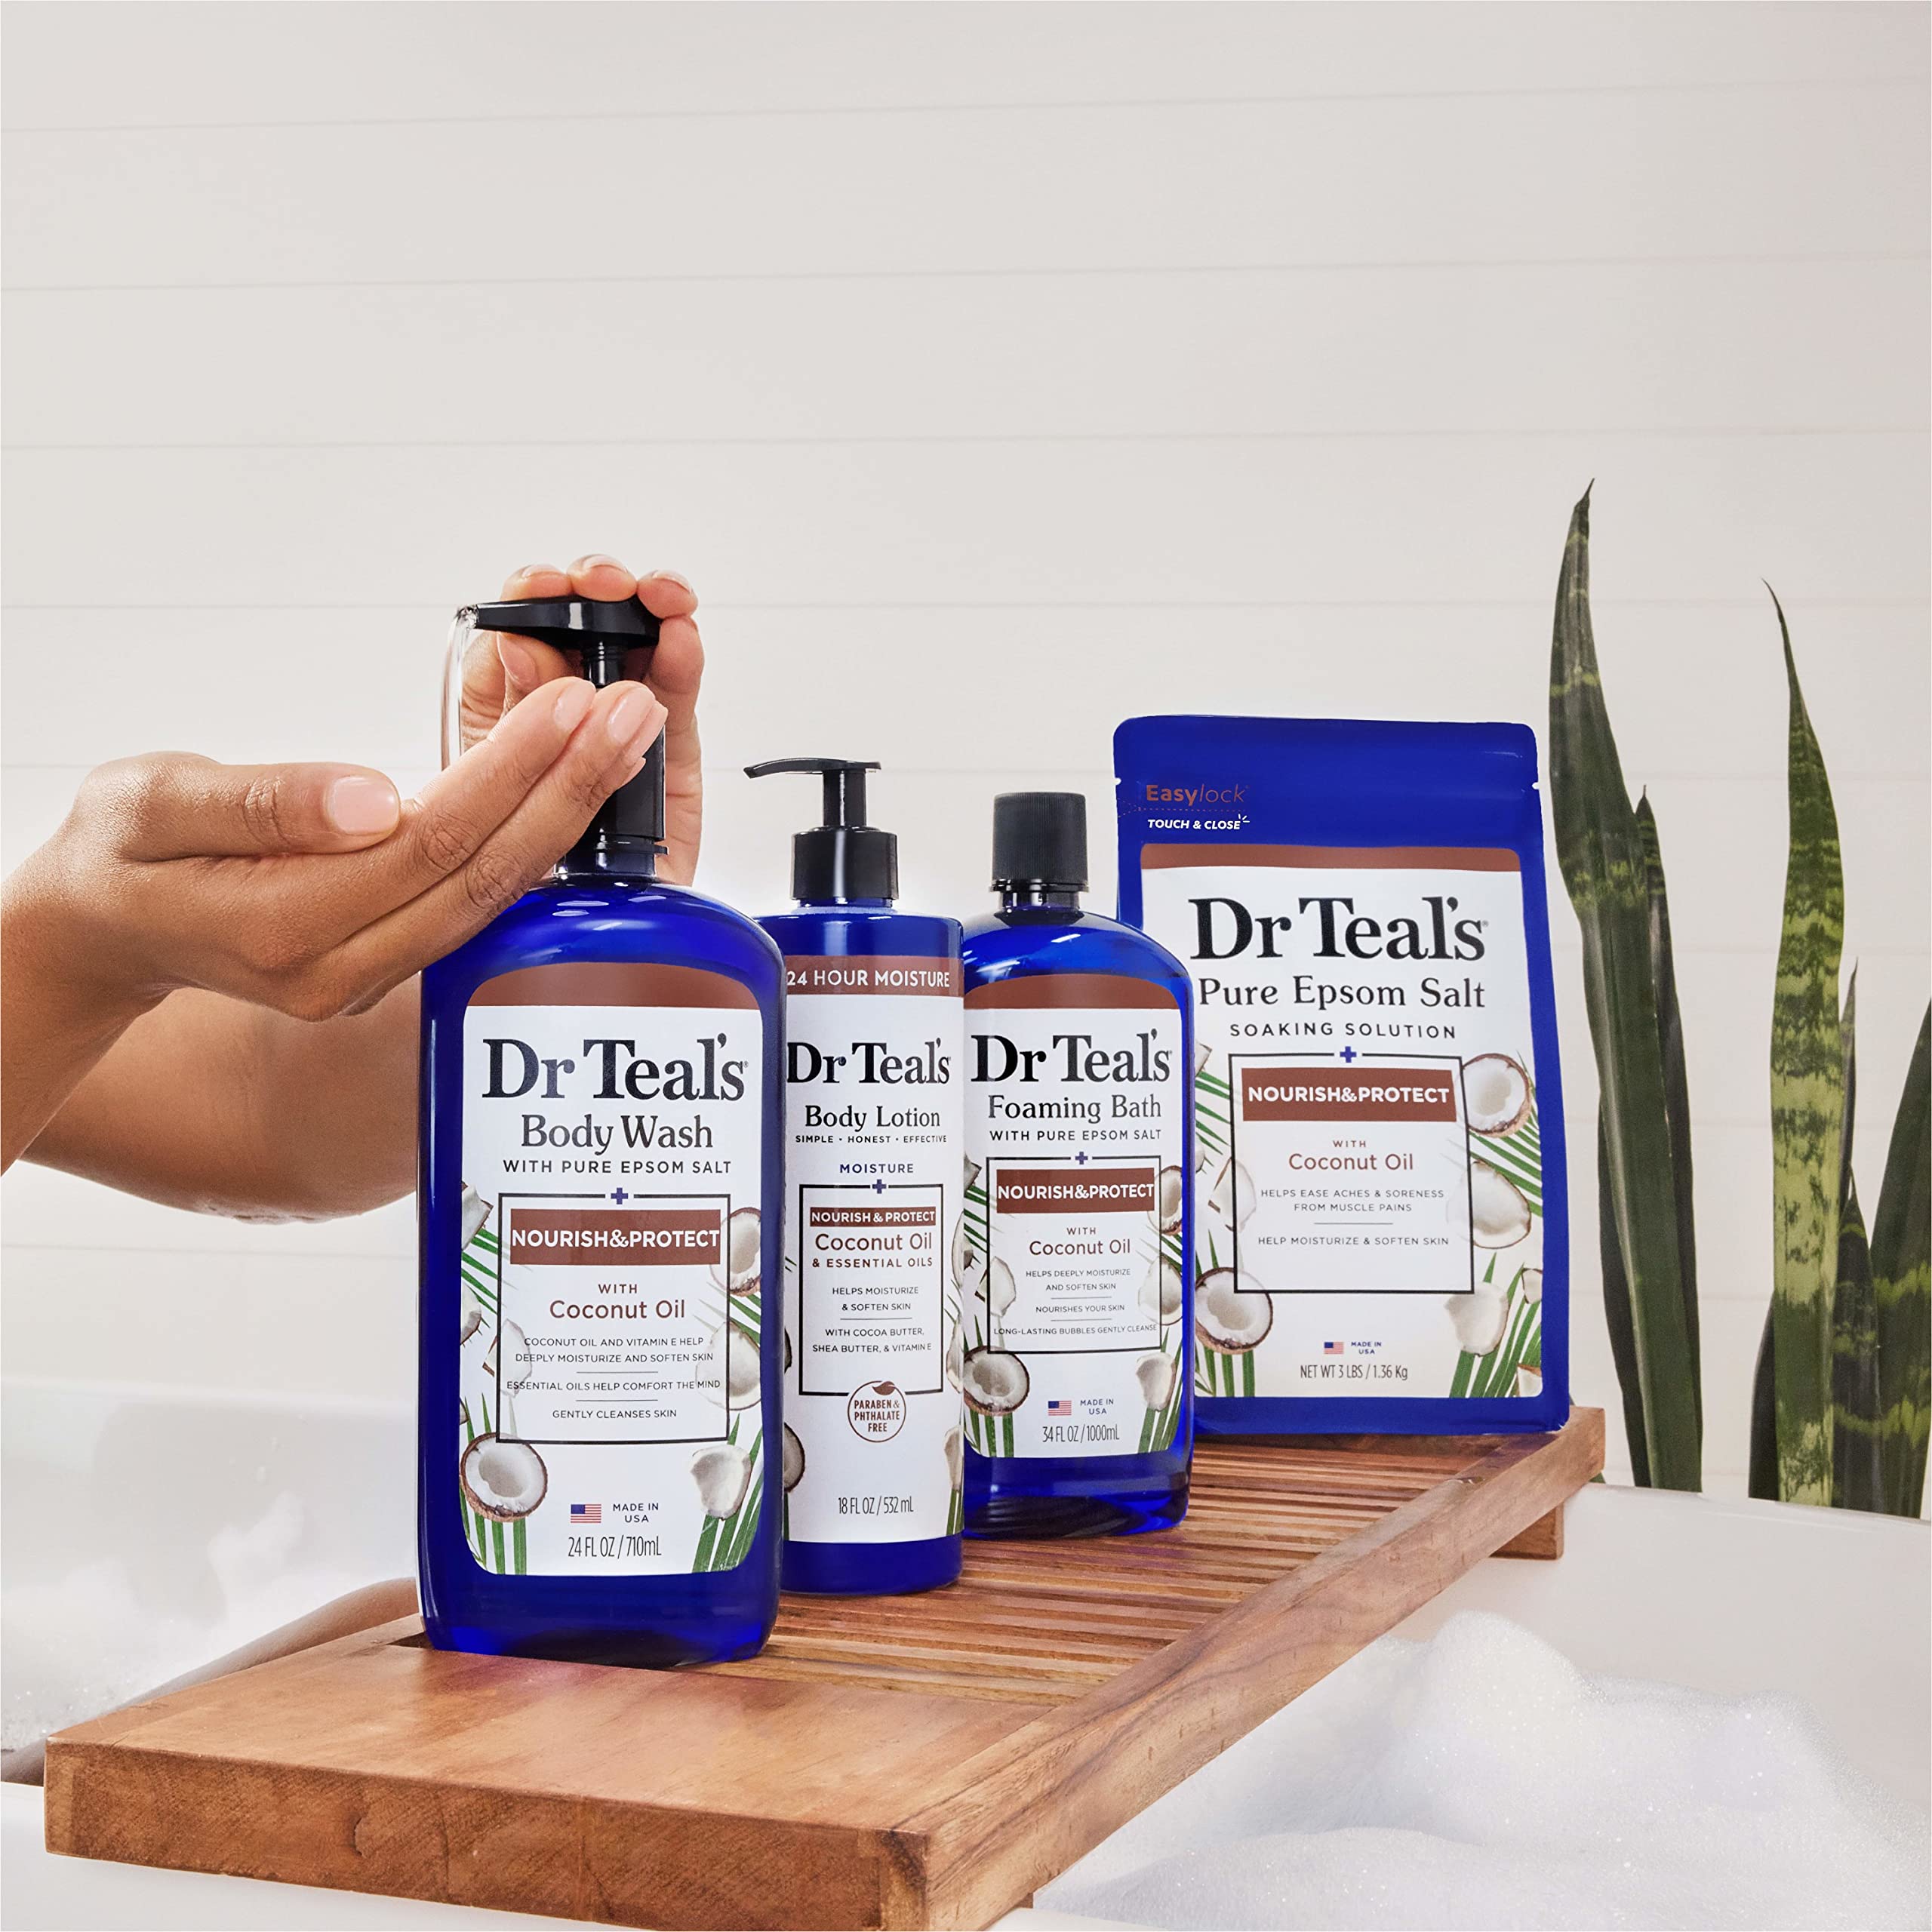 Dr Teal's Pure Epsom Salt Soak, Nourish & Protect with Coconut Oil, 3 lbs (Packaging May Vary)